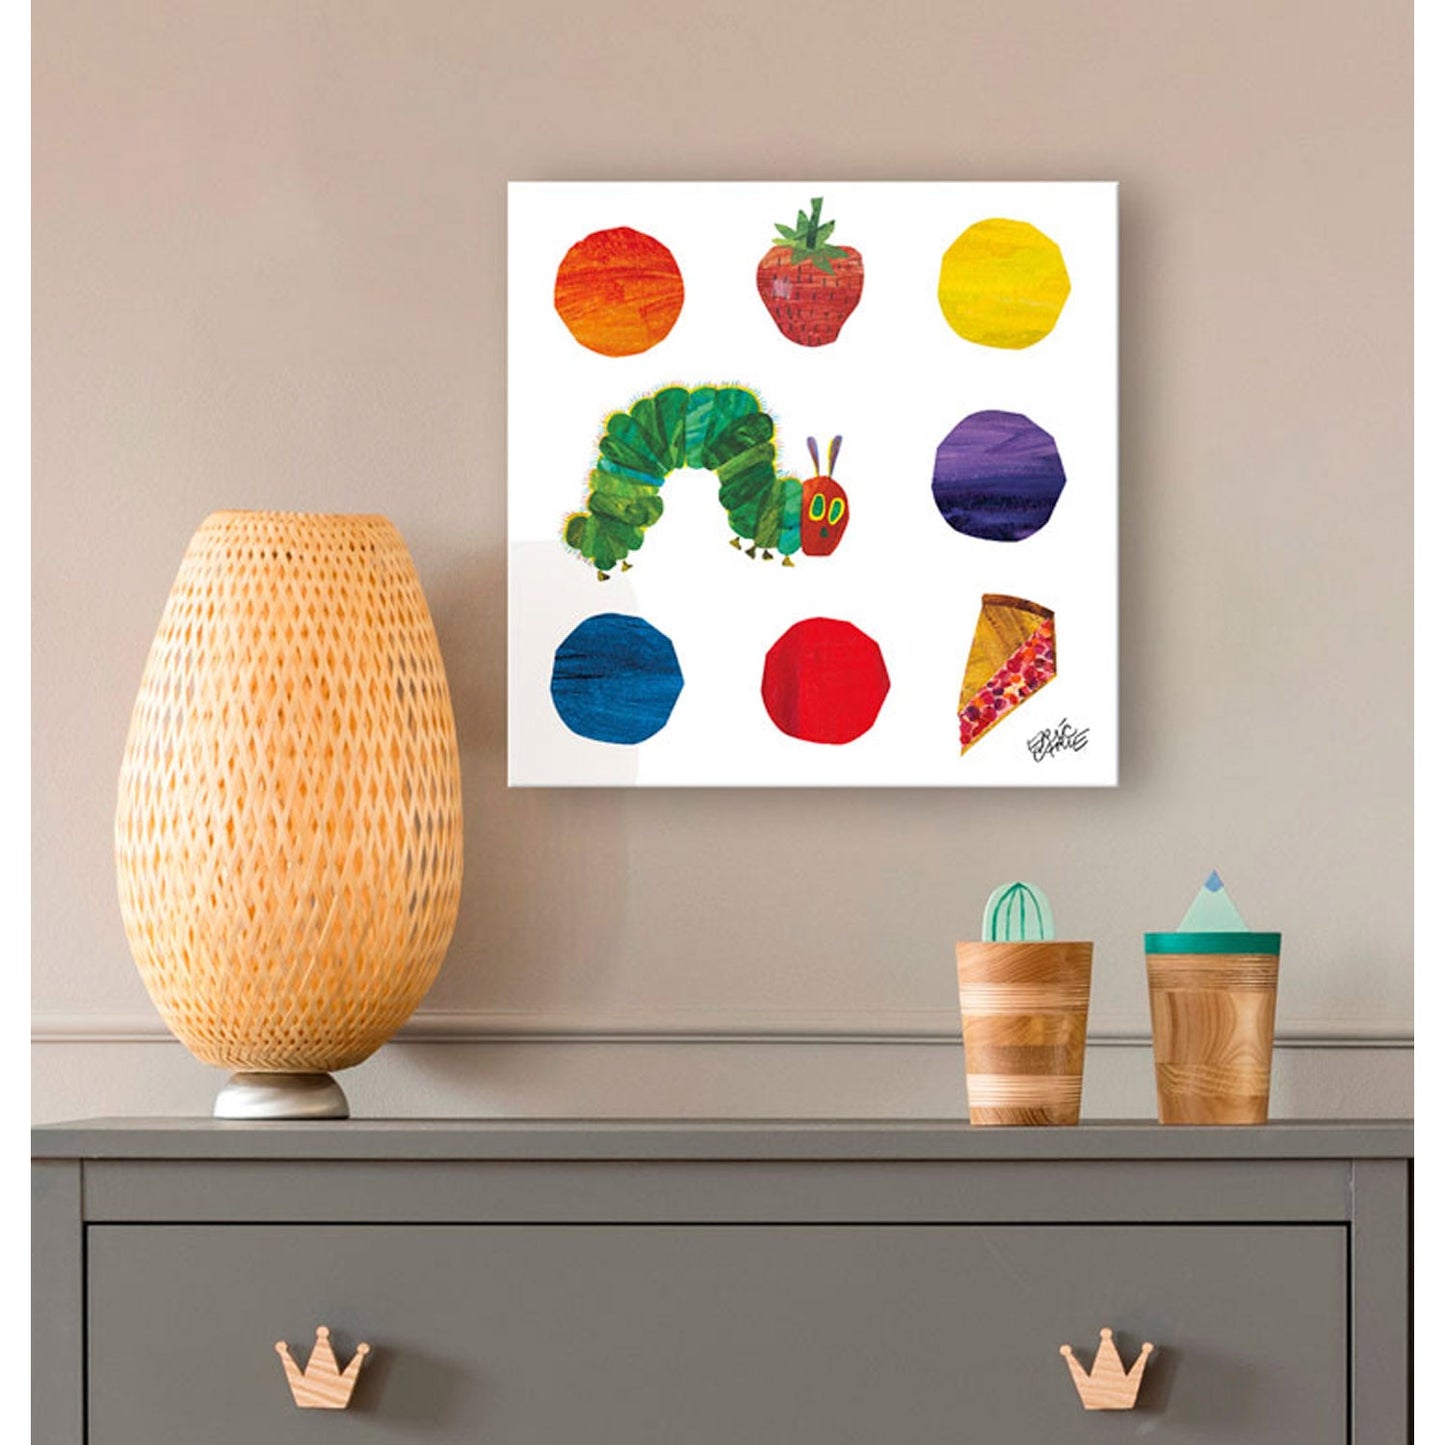 Eric Carle's The Very Hungry Caterpillar (TM) and Dots Canvas Wall Art